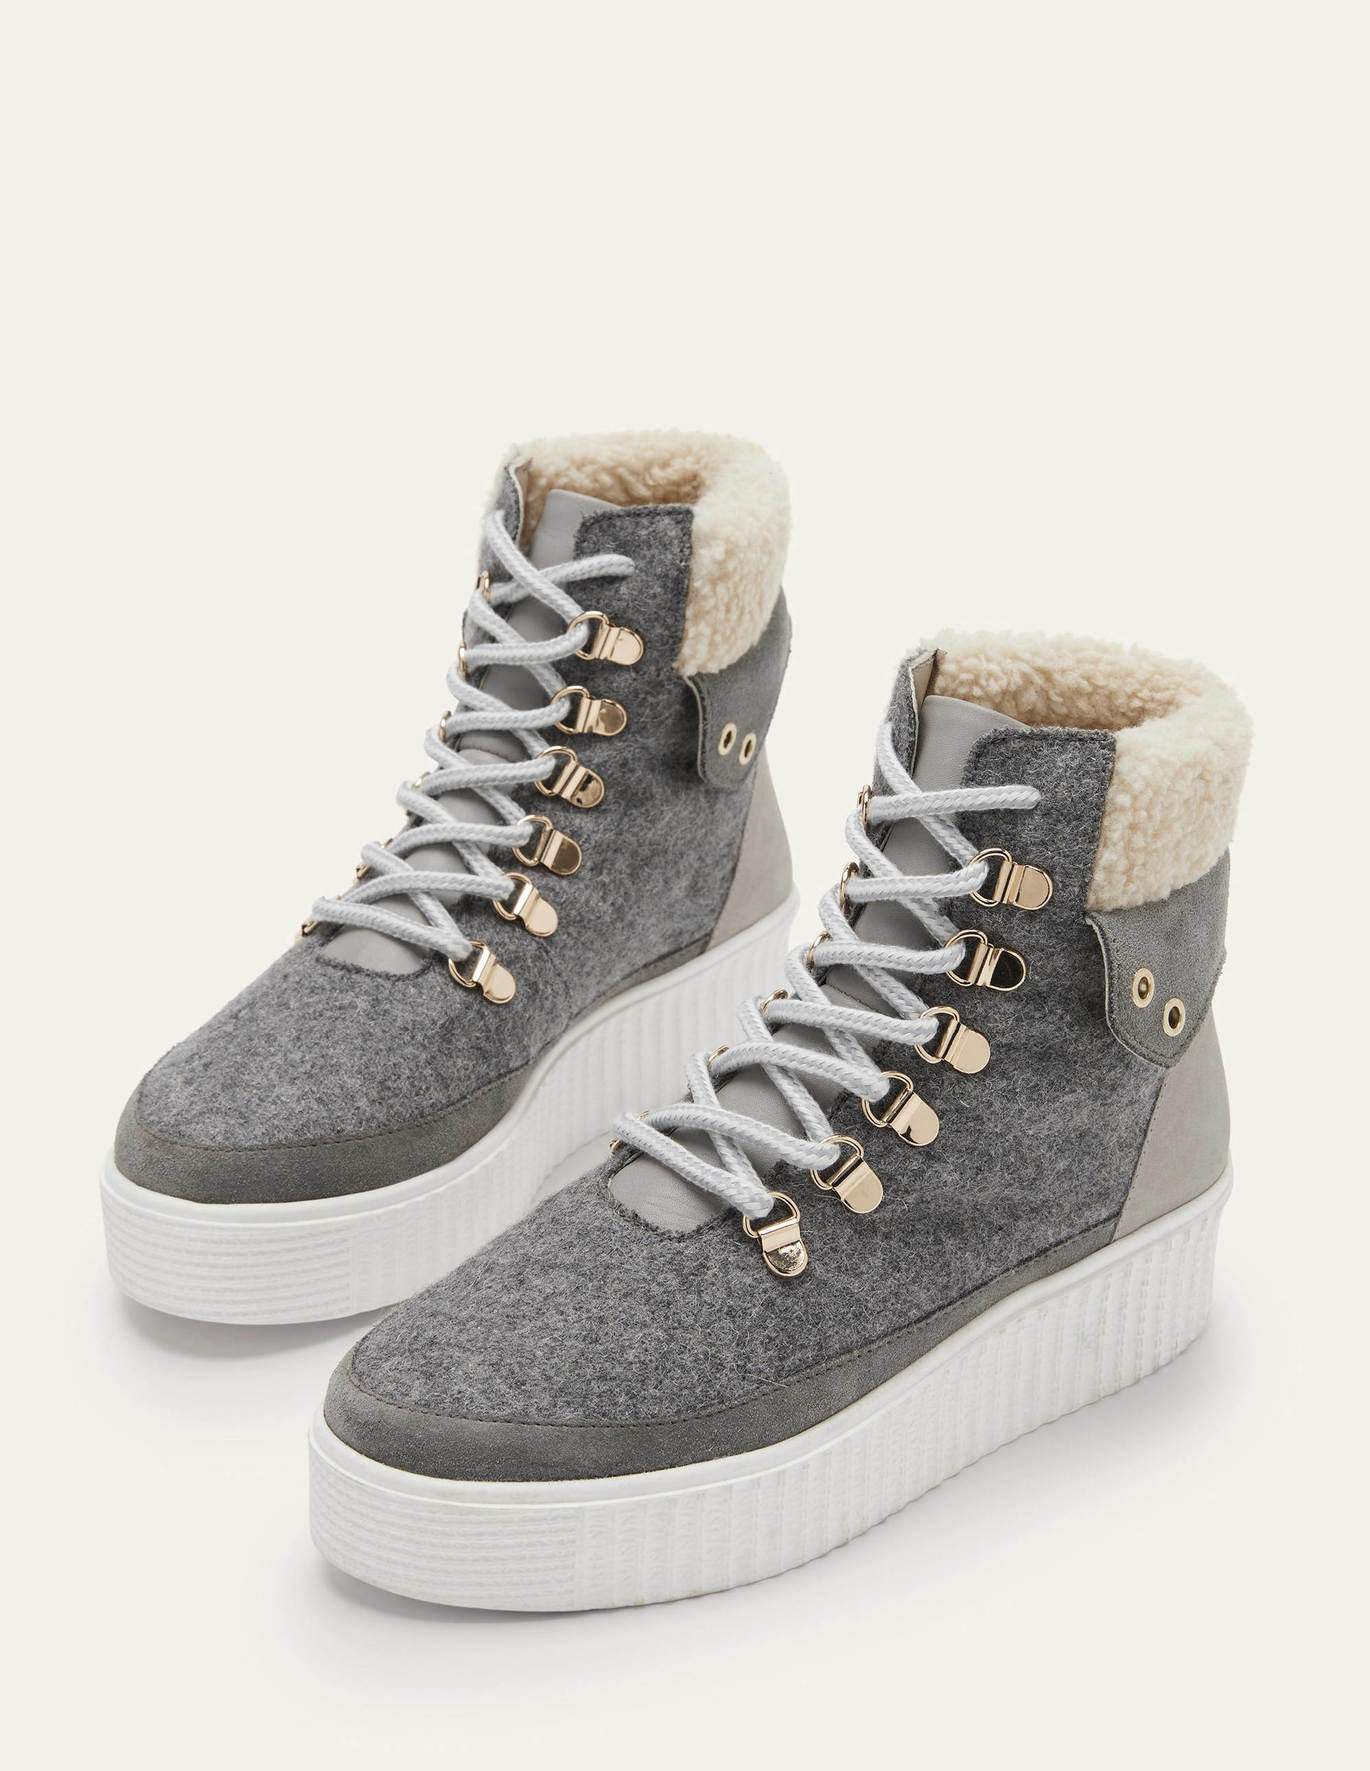 Boden Laura Trend Hiking Boots - Grey Marl